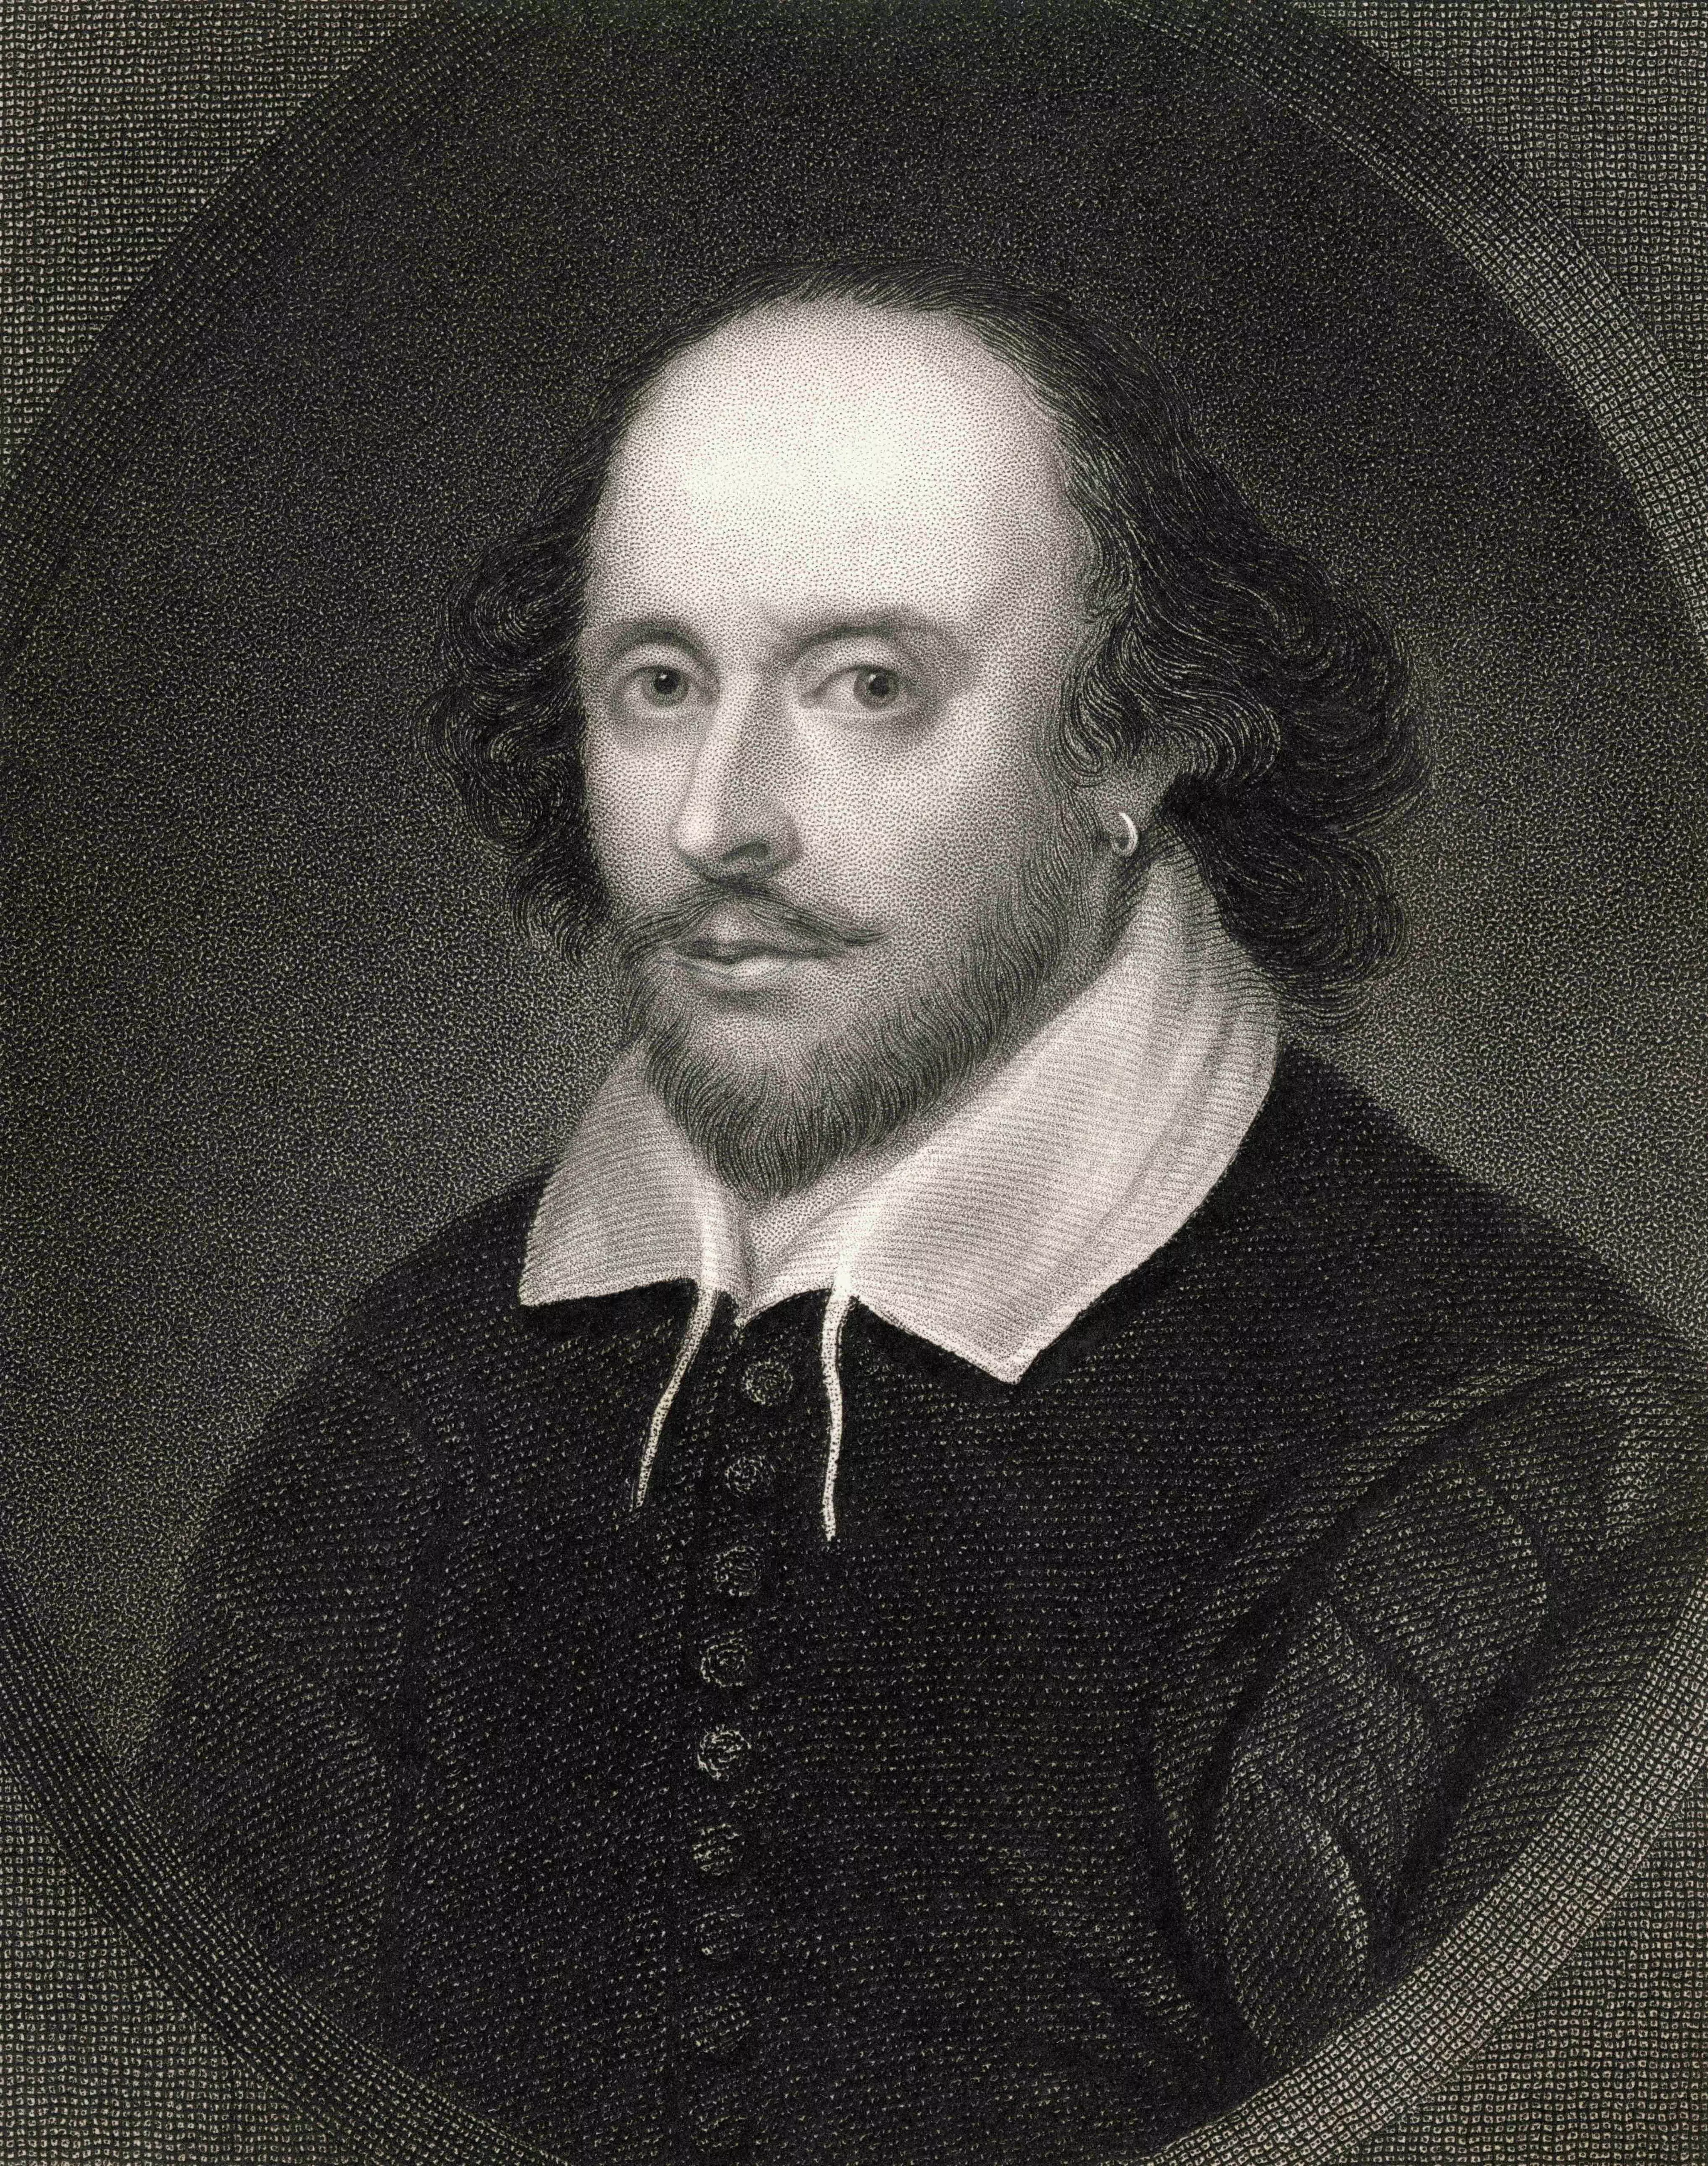 A portrait of playwright William Shakespeare, who died in 1616.